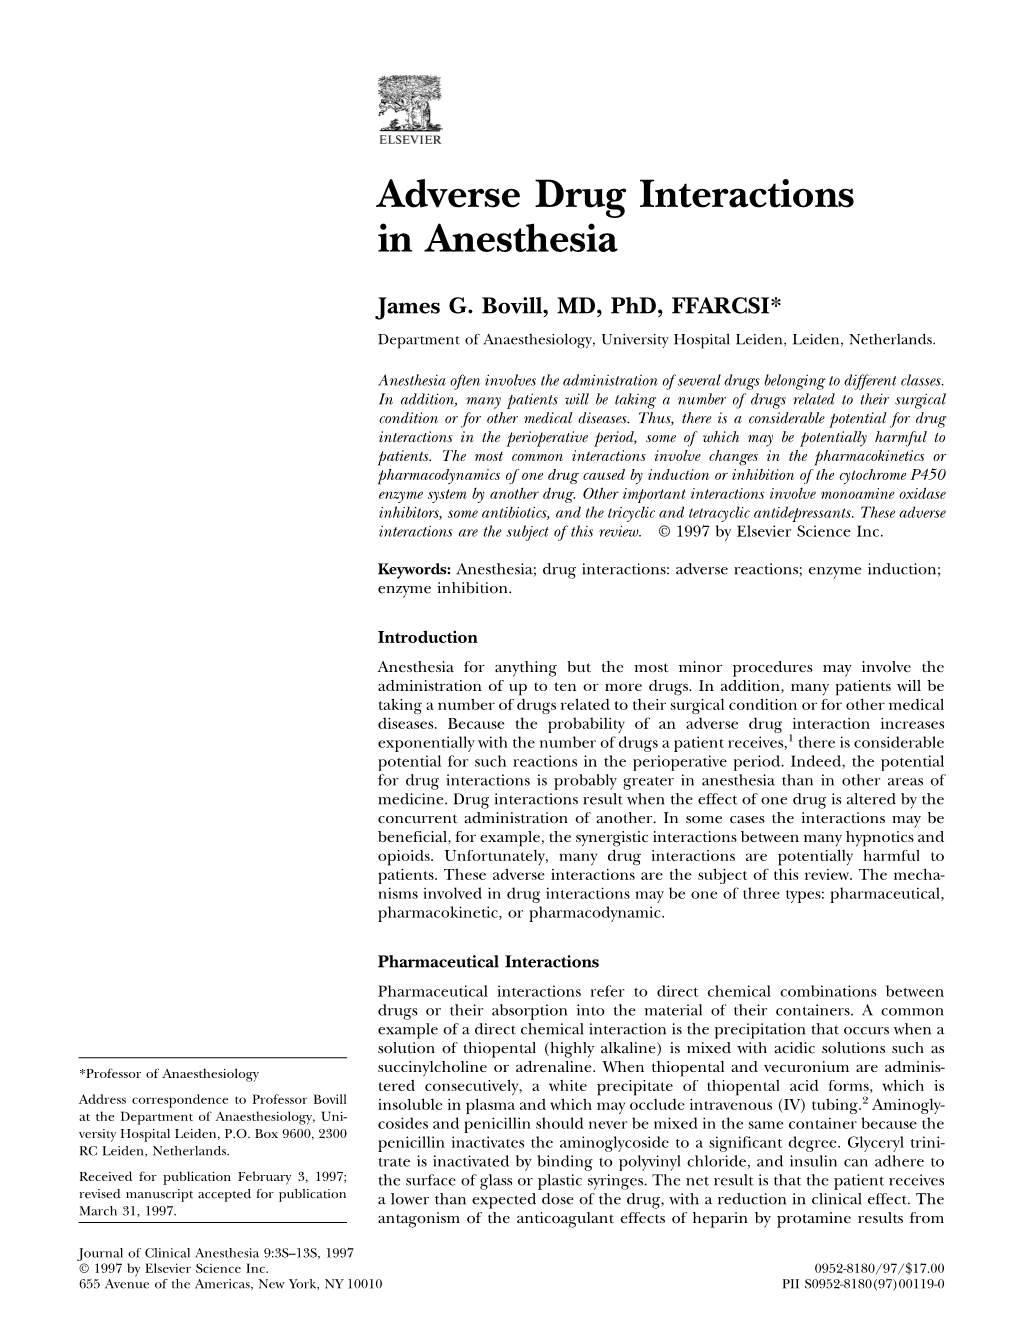 Adverse Drug Interactions in Anesthesia